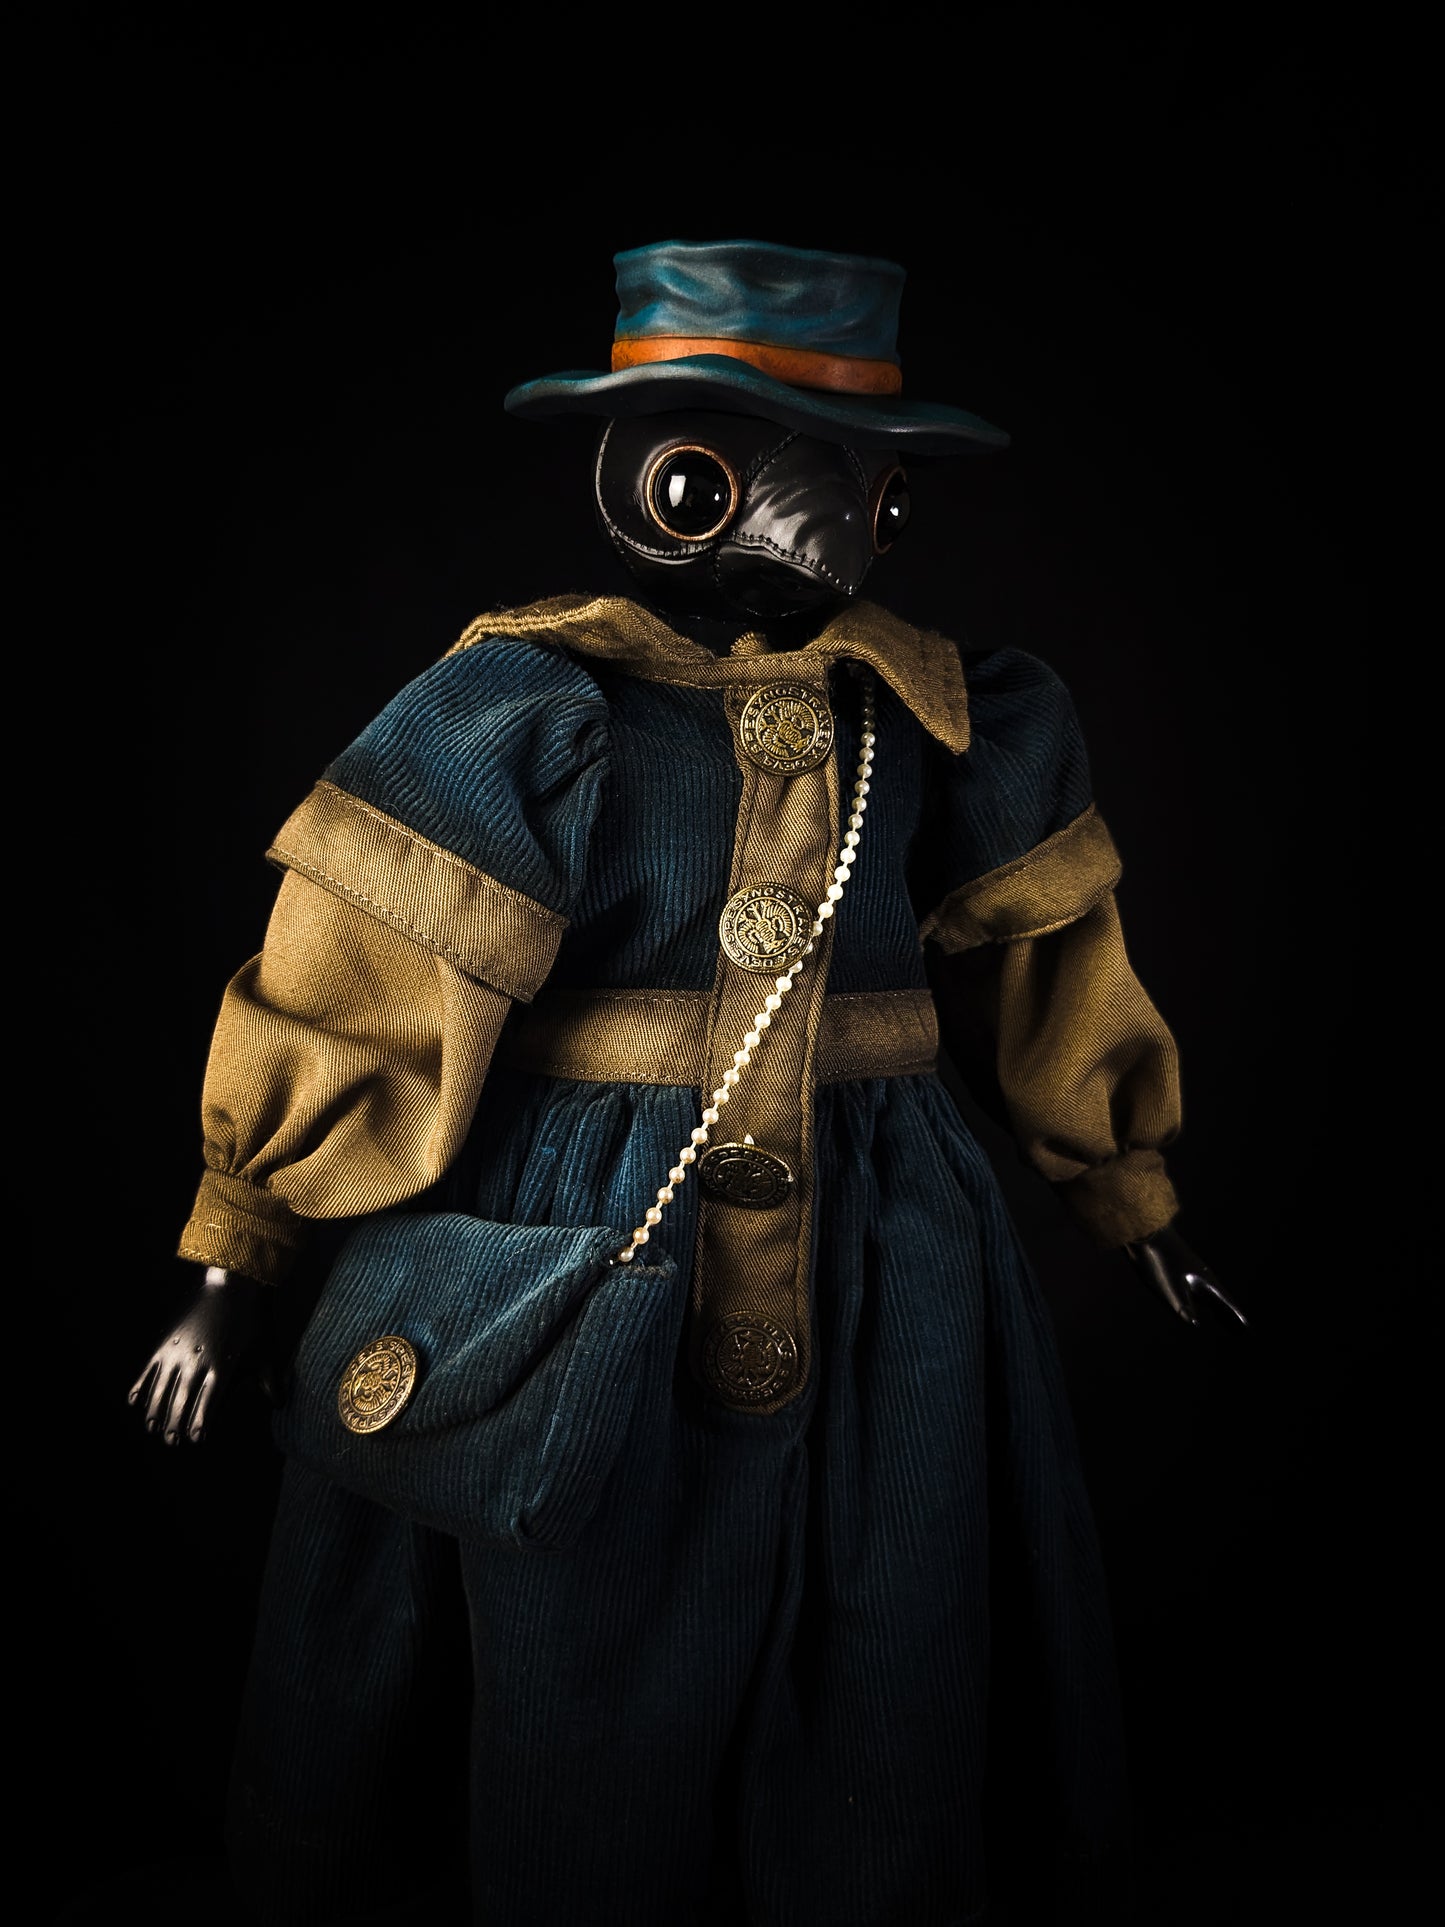 Depression Dolls: The Doctor II - Handmade Plague Doctor Gothic Art Doll for Enigmatic Souls